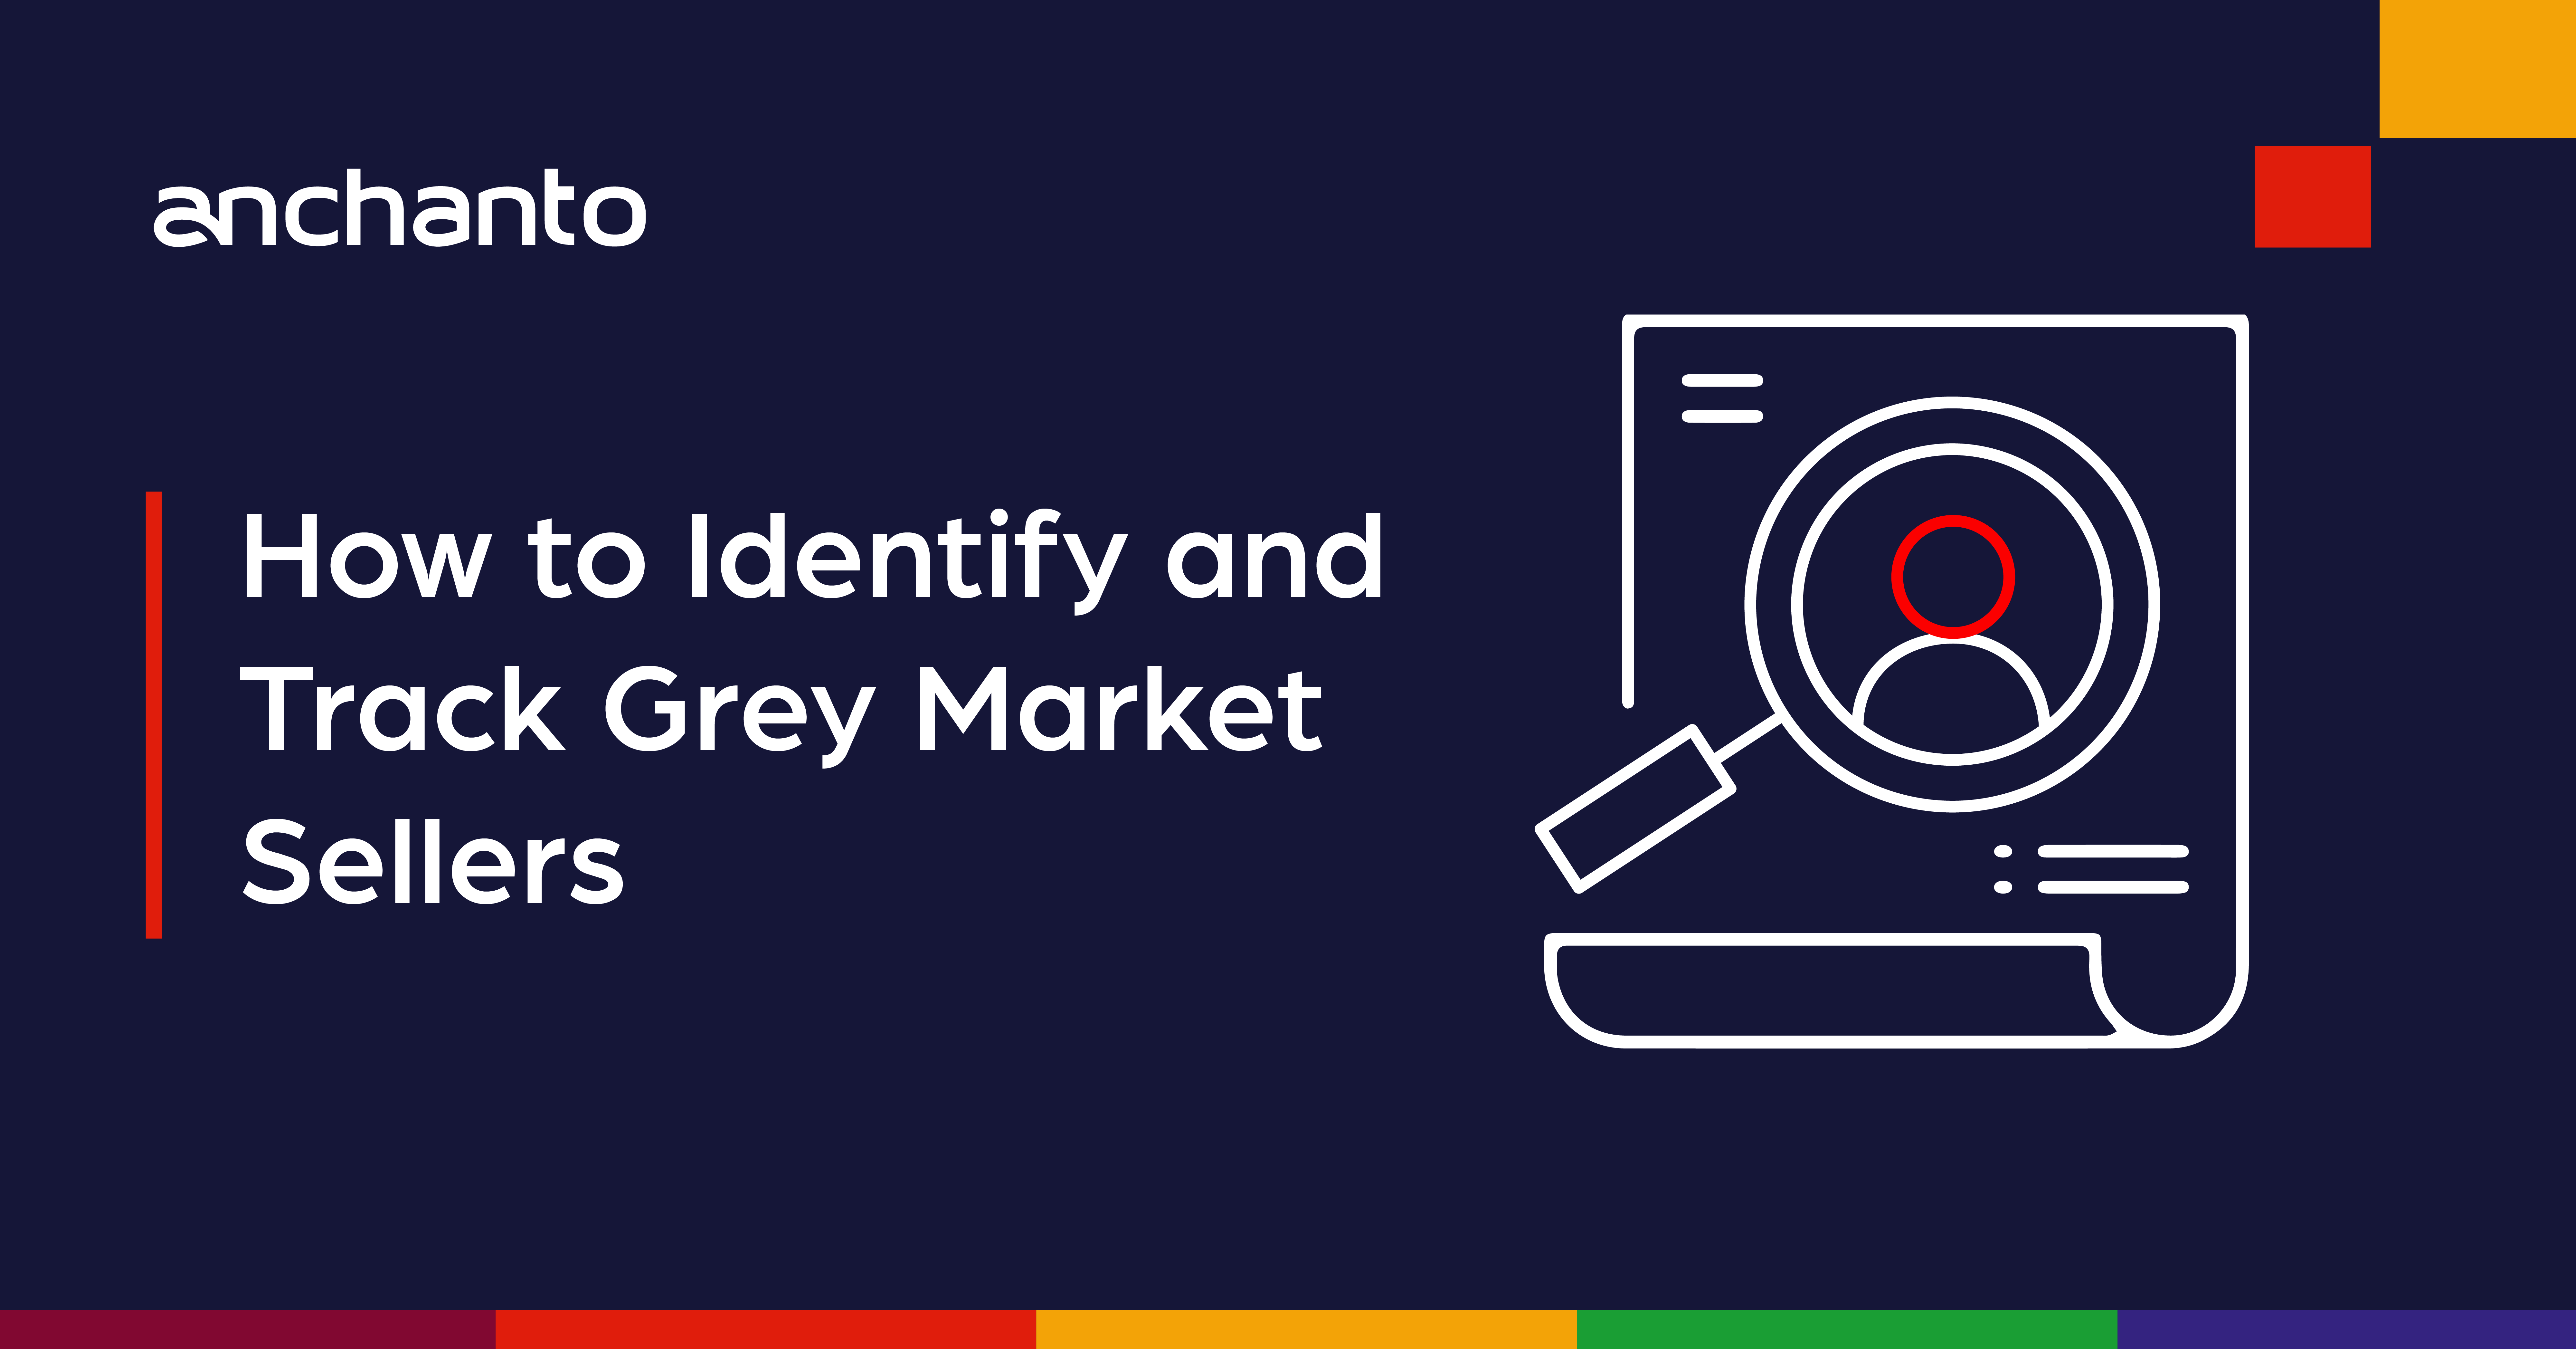 How to Identify and Track Grey Market Sellers